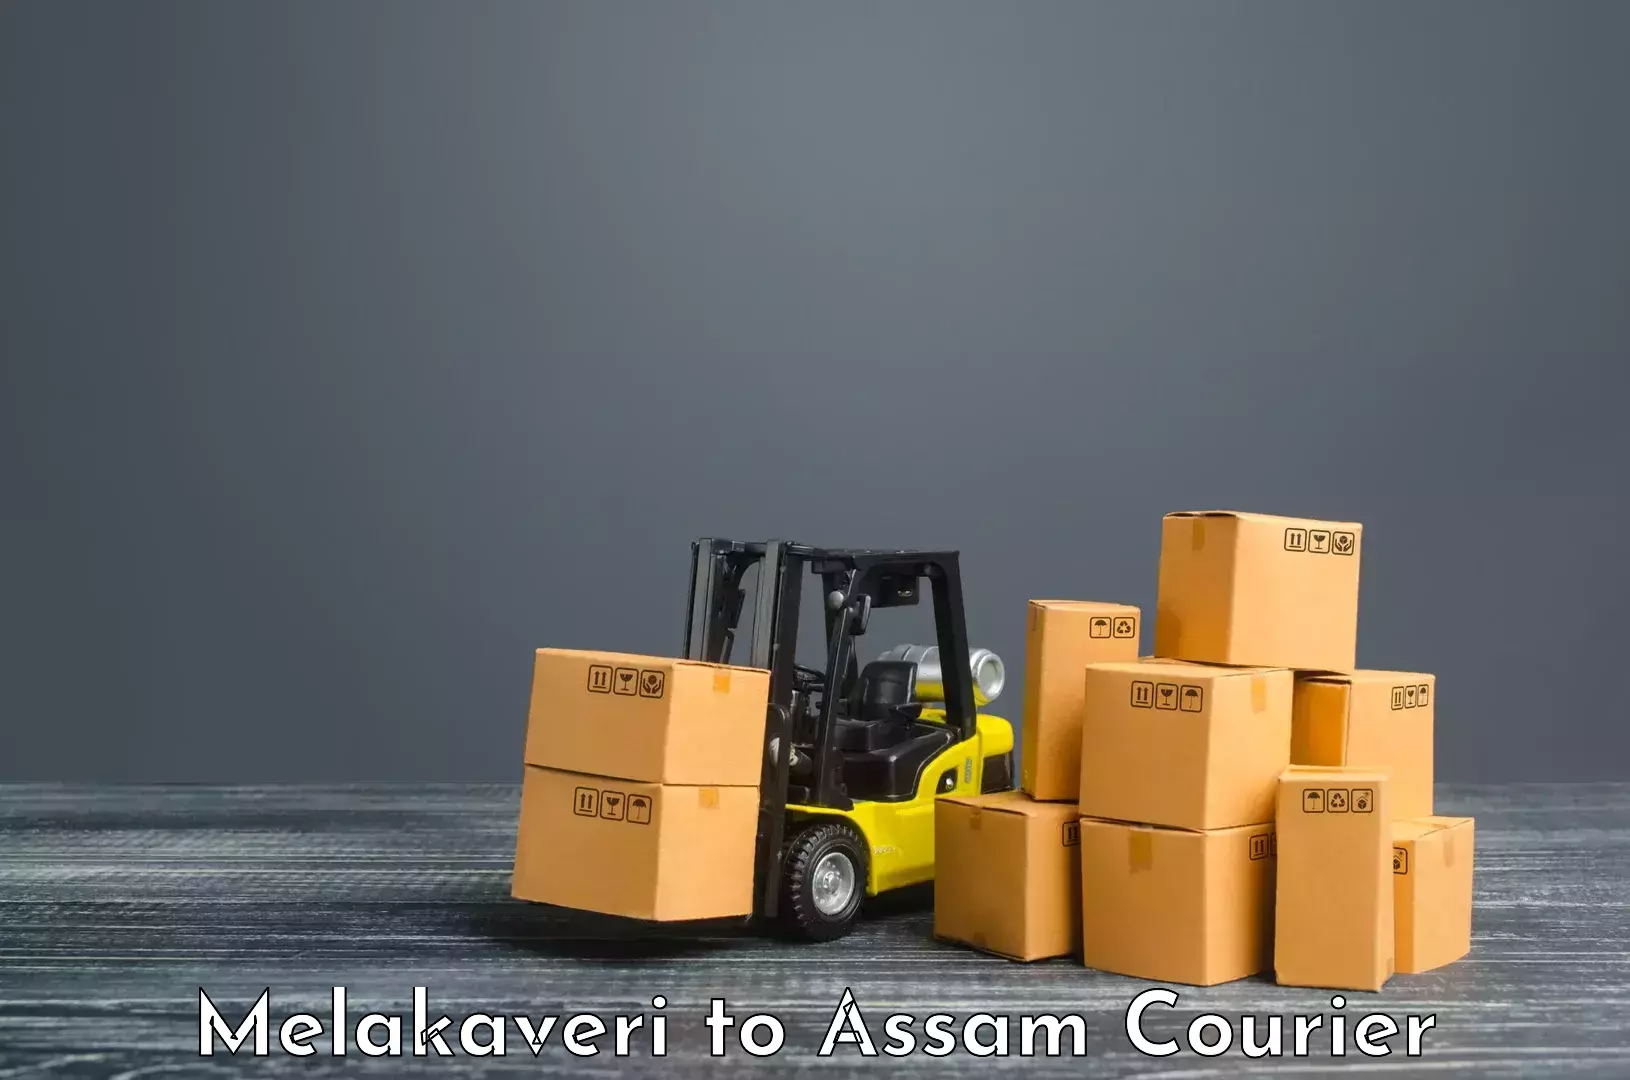 Flexible delivery schedules Melakaveri to Rangia